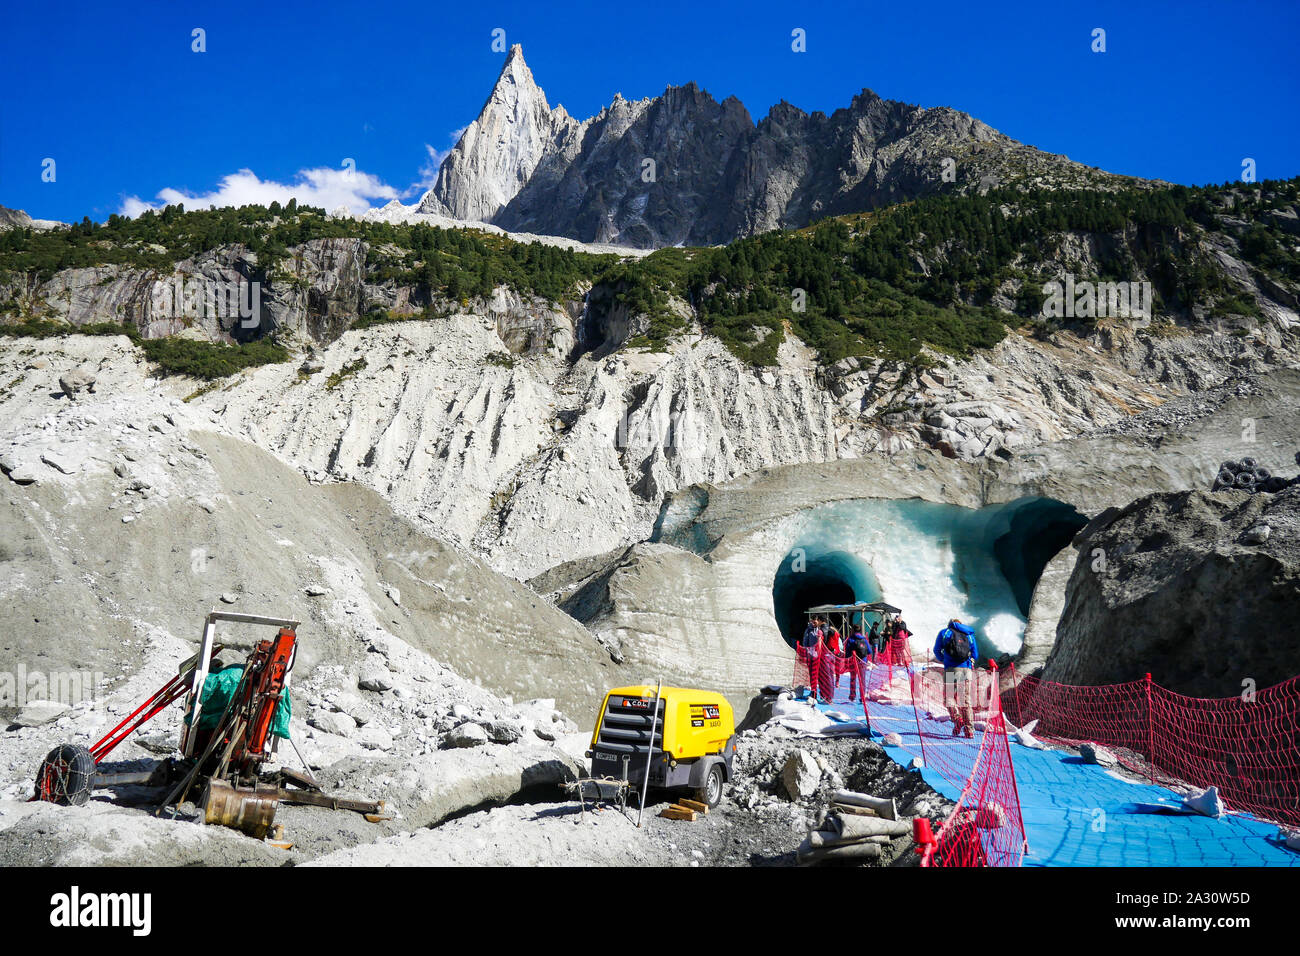 Ice Sea - in French, Mer de Glace, Chamonix-Mont-Blanc valley, Haute-Savoie, France Stock Photo